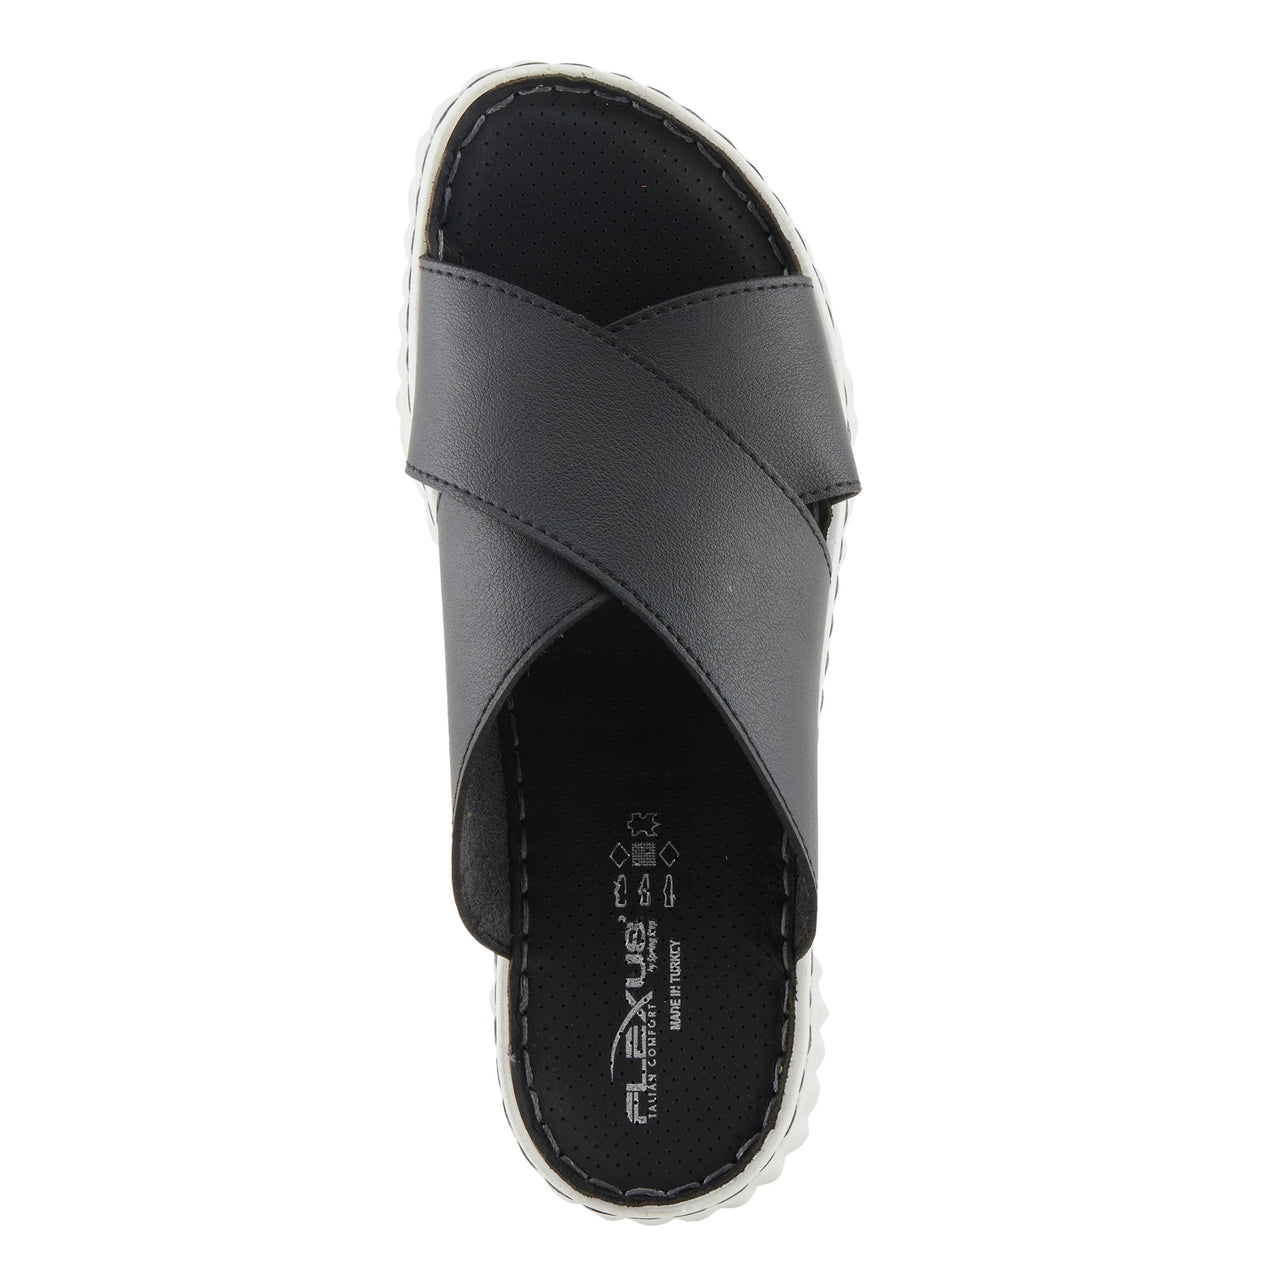 Comfortable and stylish Spring Step Shoes Flexus Alderine Sandals in Black